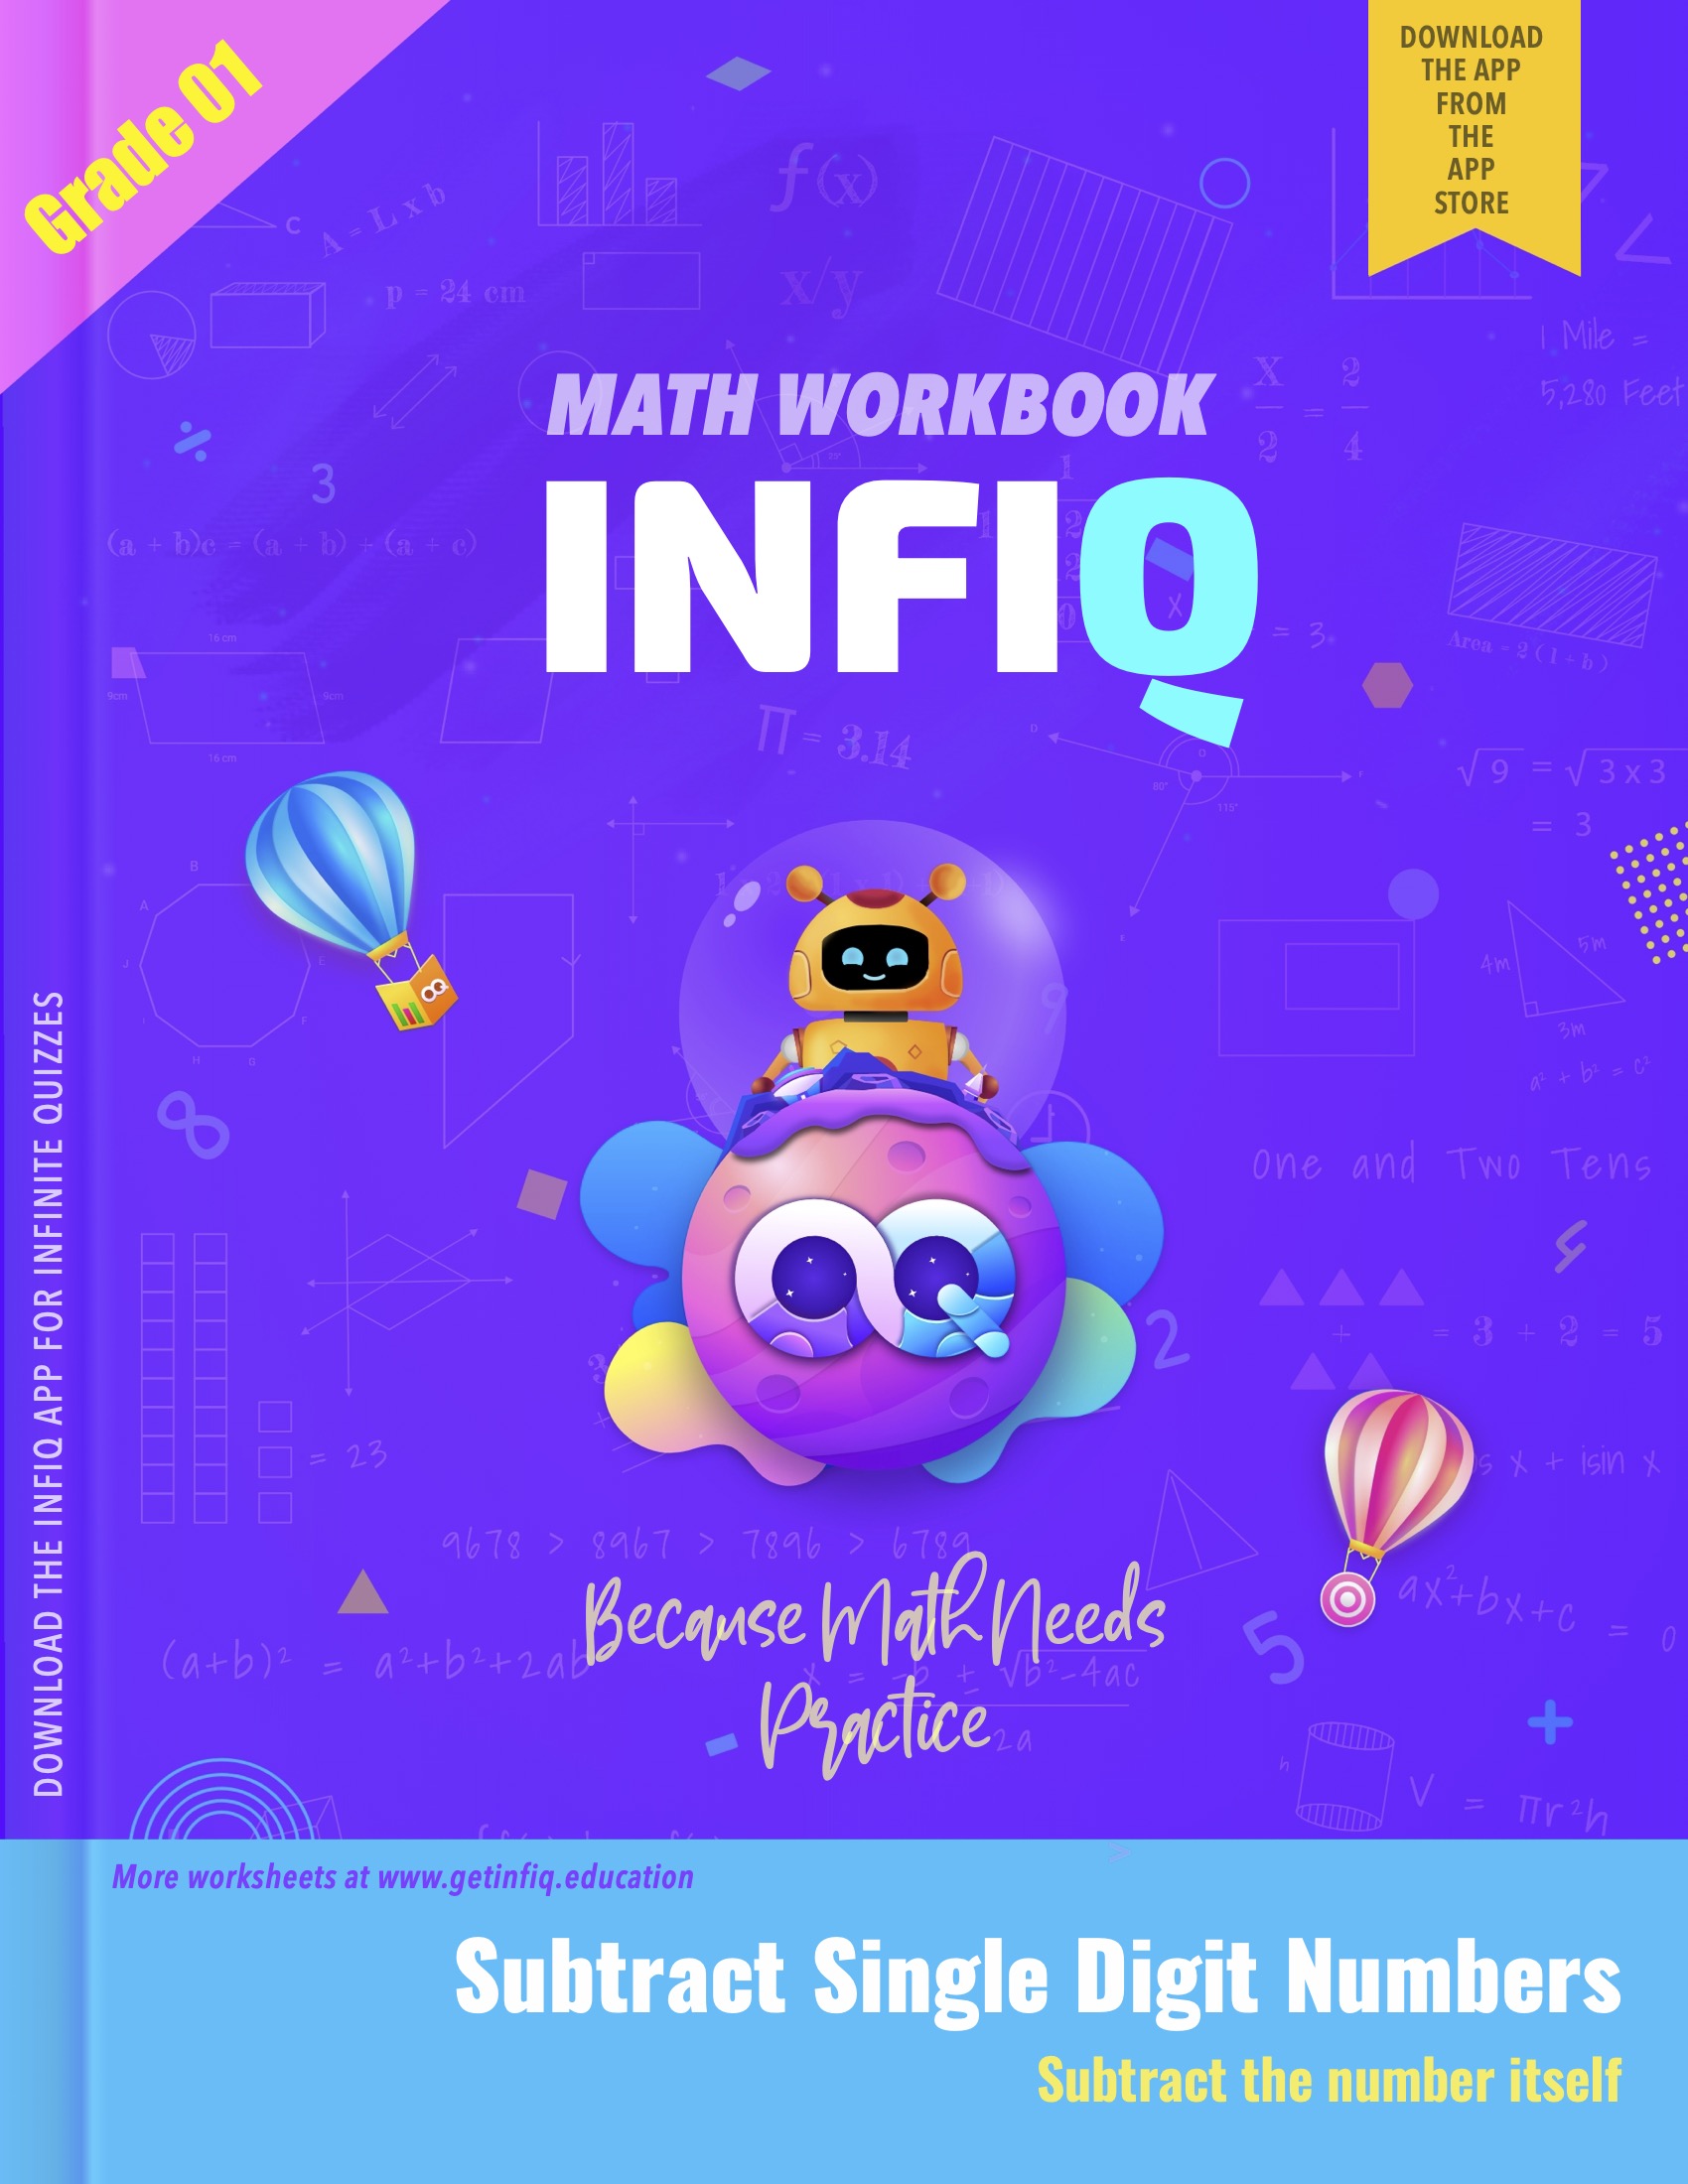 Grade 1 Math: Subtract Single Digit Numbers - Subtract the number itself Workbook